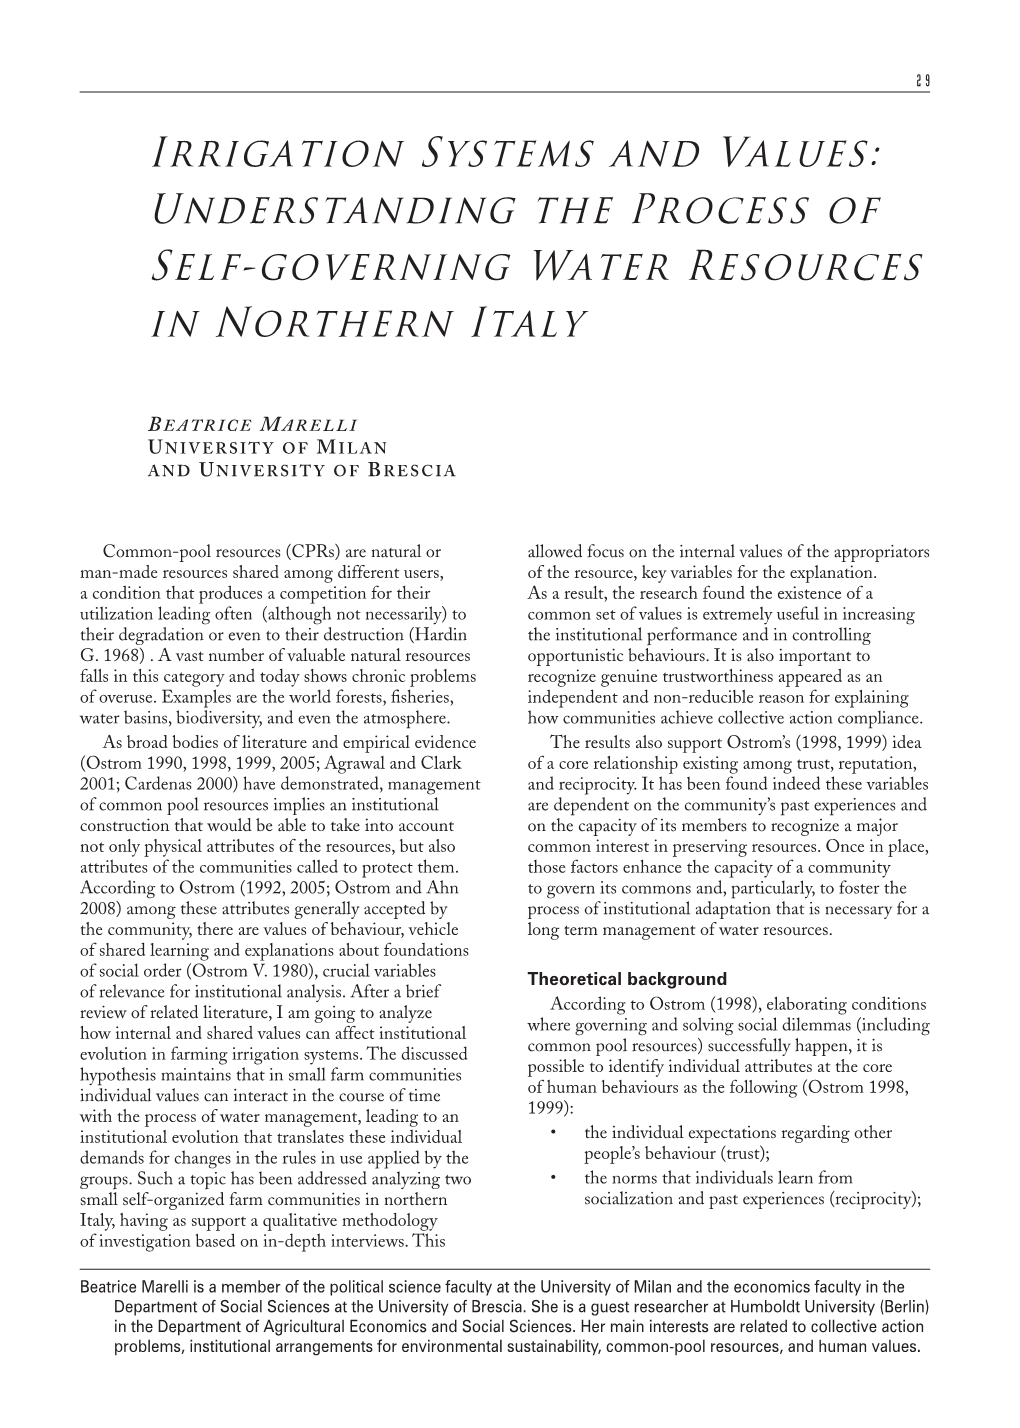 Irrigation Systems and Values: Understanding the Process of Self-Governing Water Resources in Northern Italy